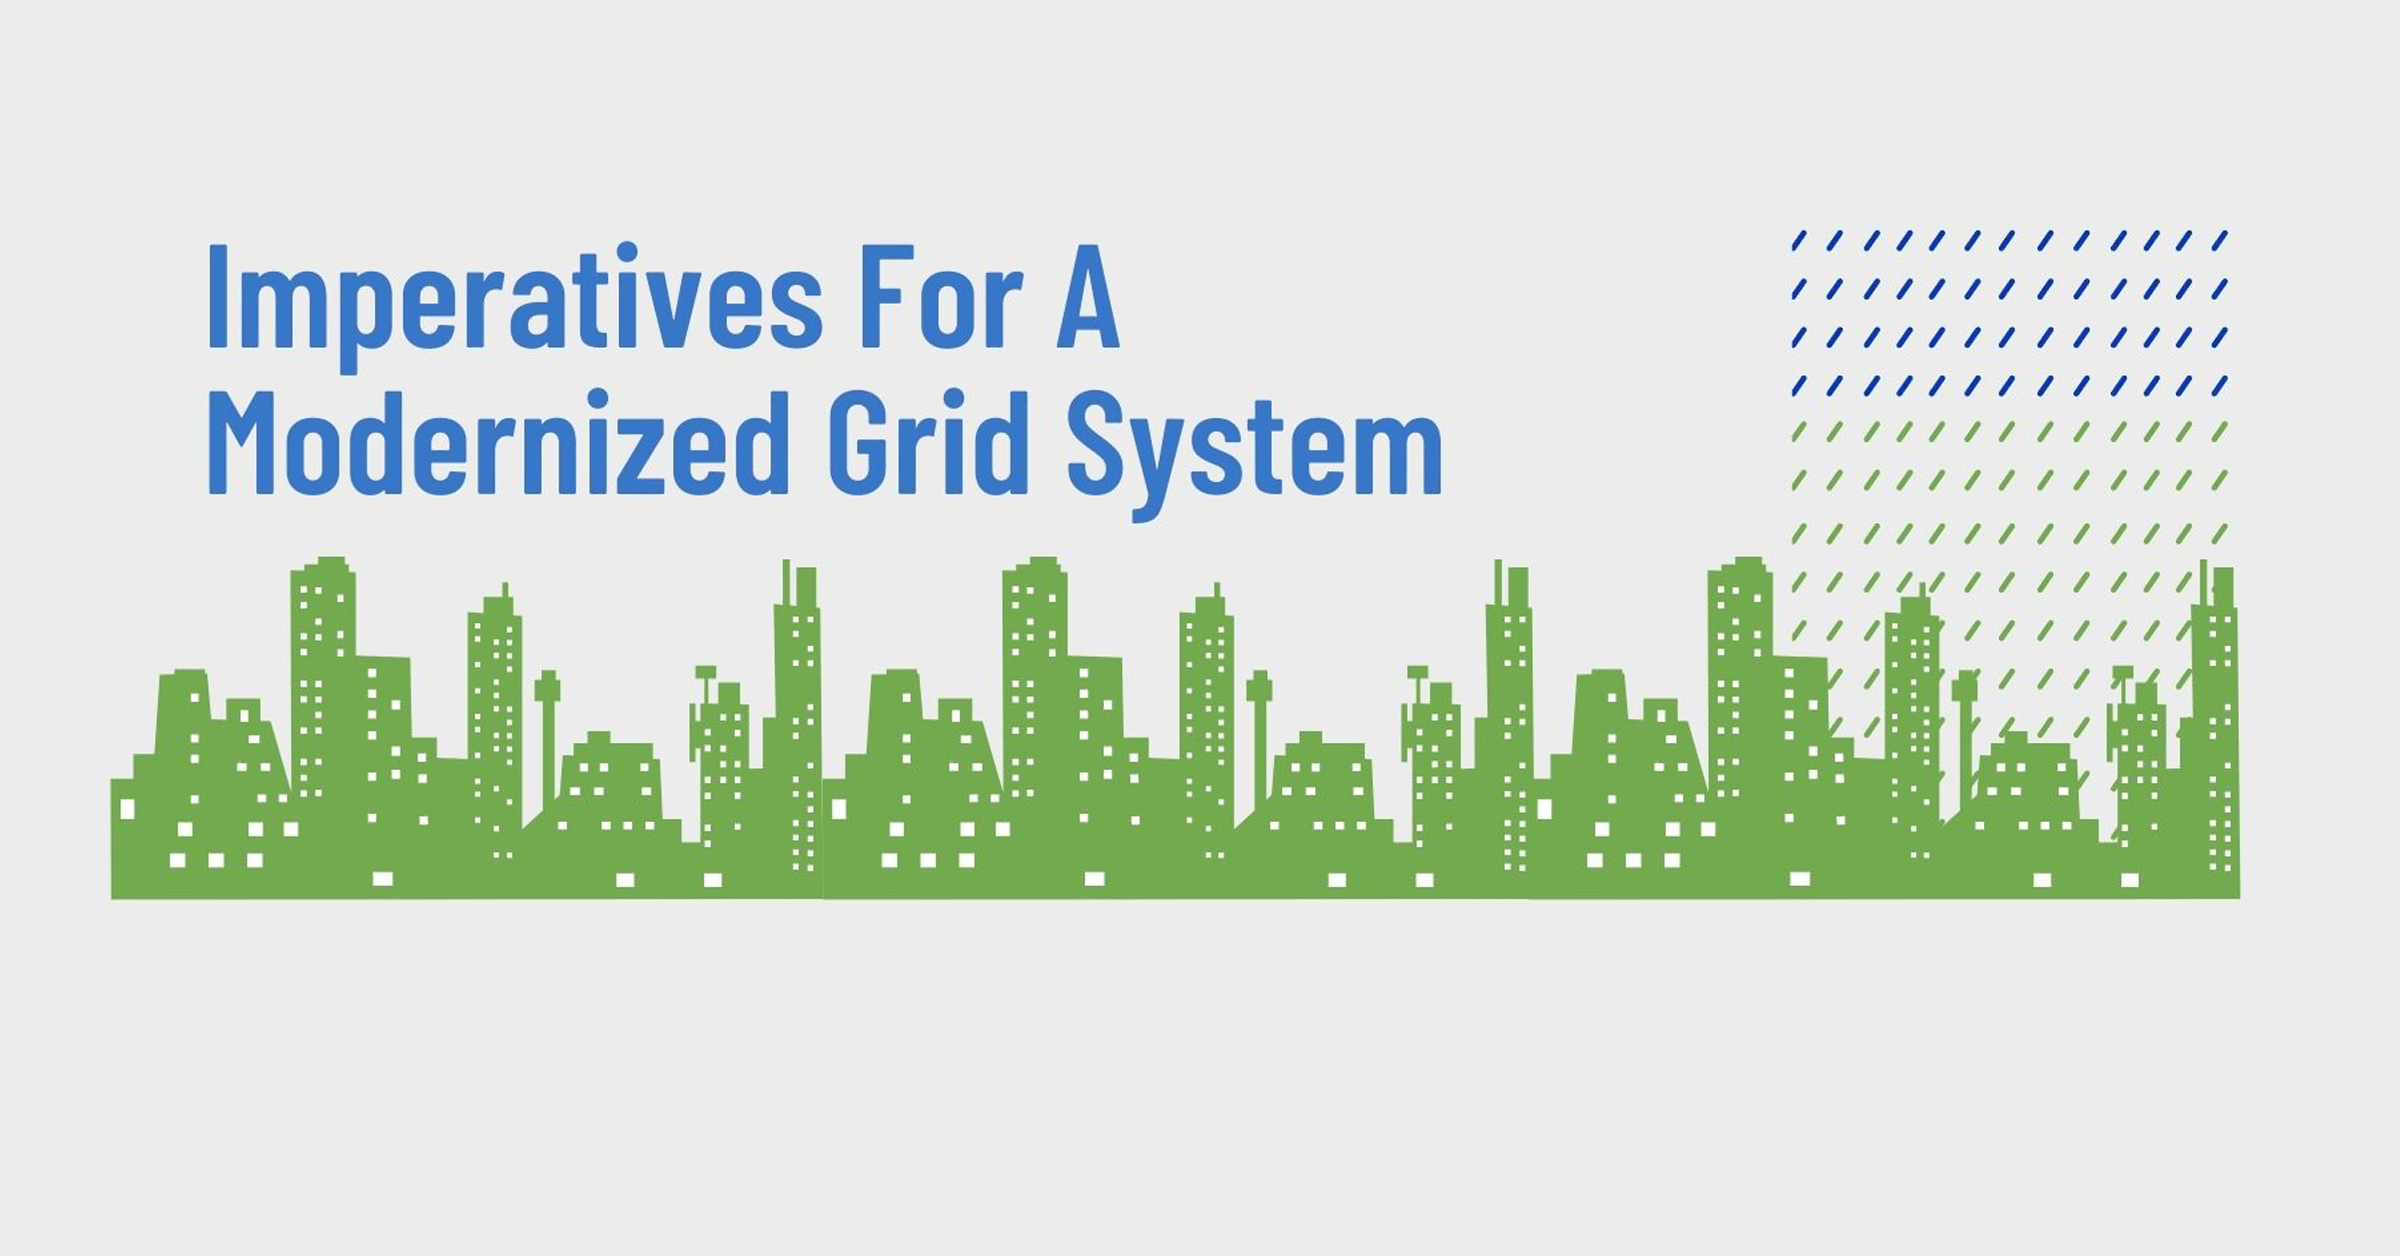 Imperatives for a modernized power grid system